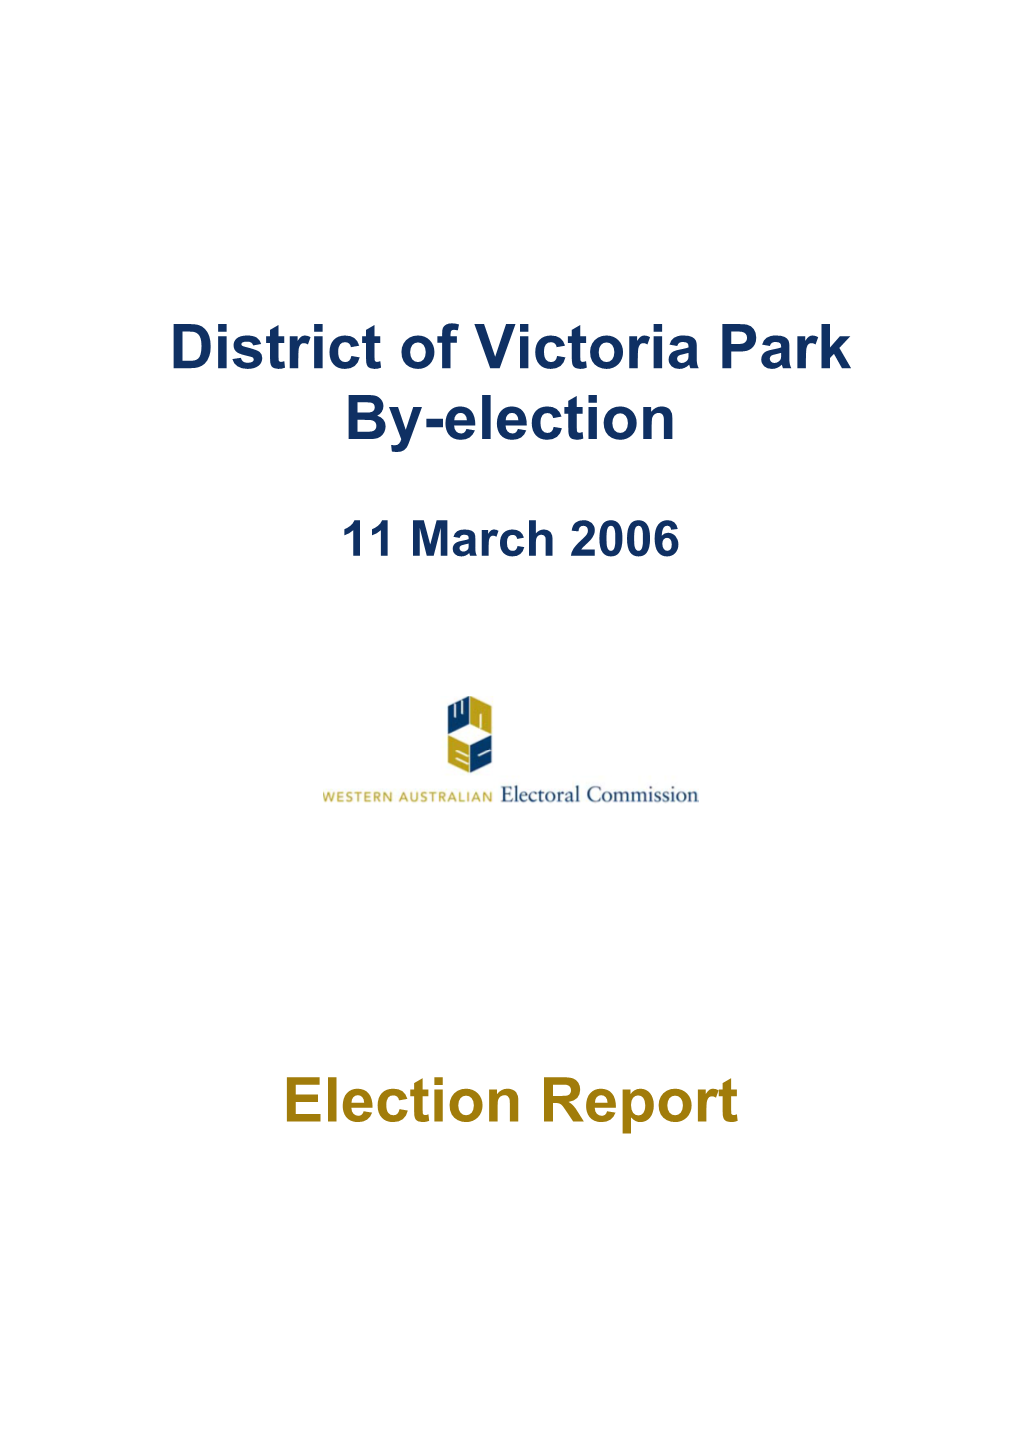 District of Victoria Park By-Election Election Report